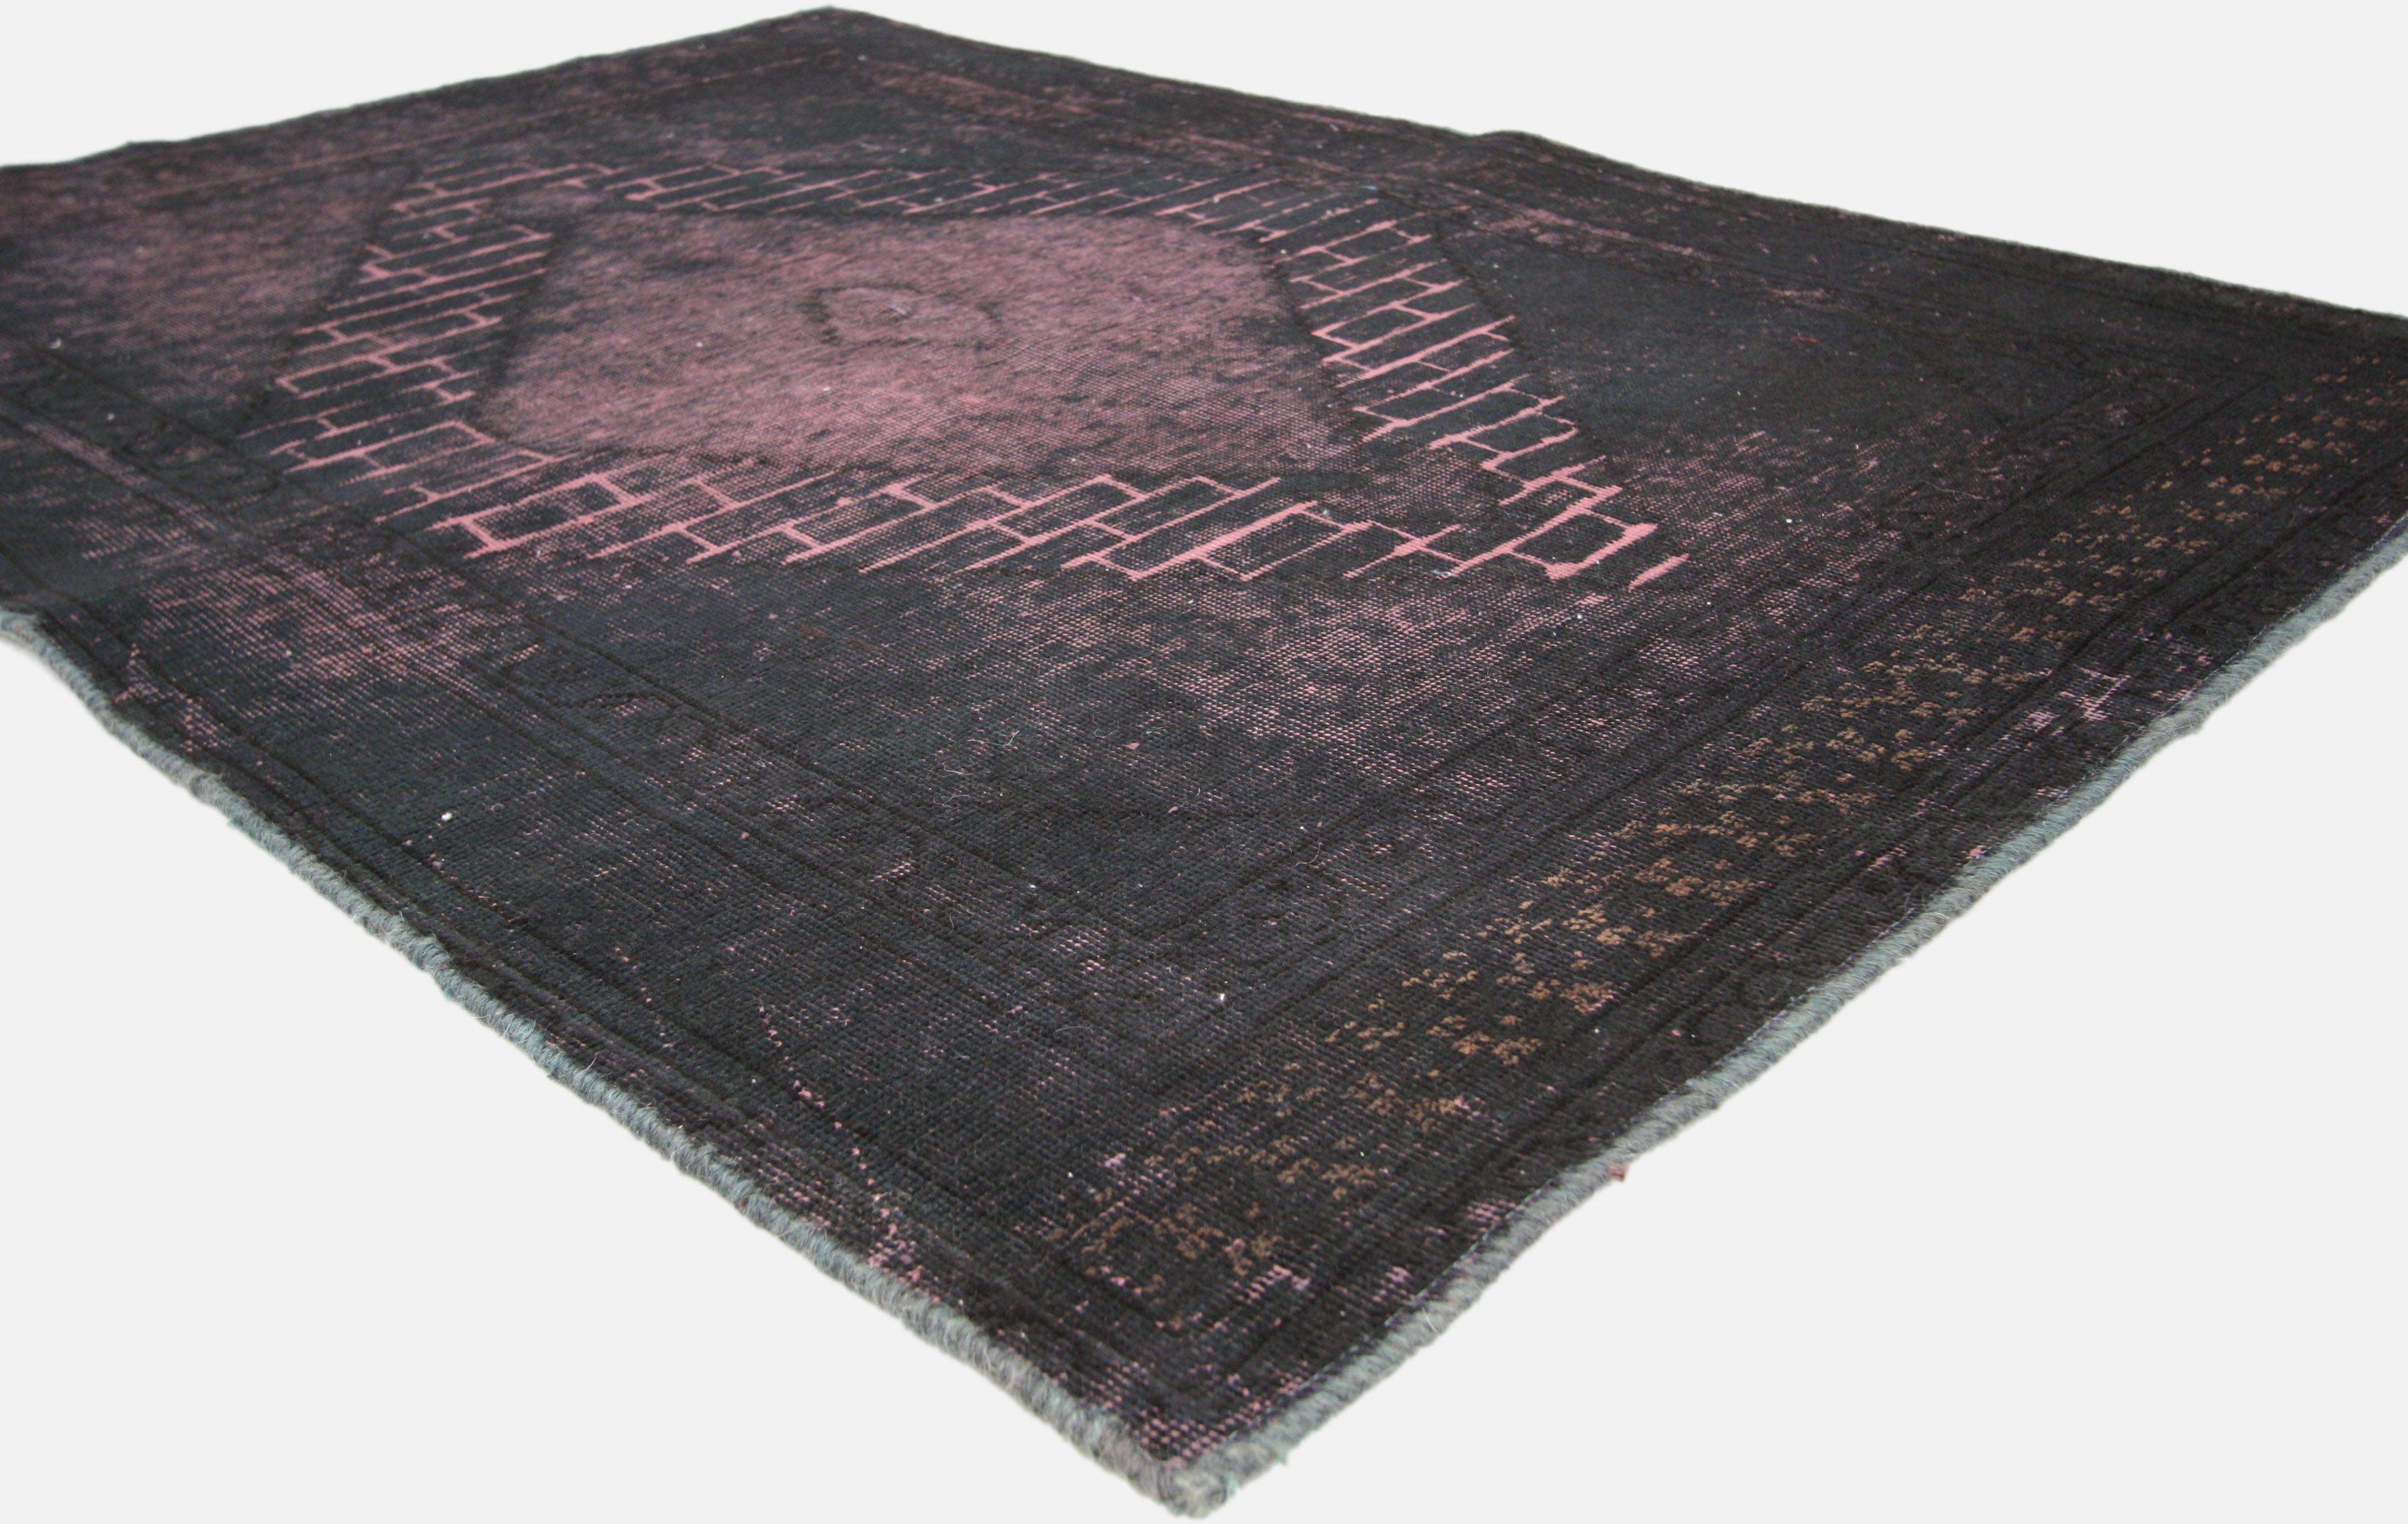 60736 Vintage Turkish Overdyed Rug, 04'02 x 05'11. 
Get ready to jazz up your floor game with this snazzy distressed overdyed vintage Turkish rug! It's not just a rug; it's a wild ride of style, with a personality that's bolder than a disco ball.